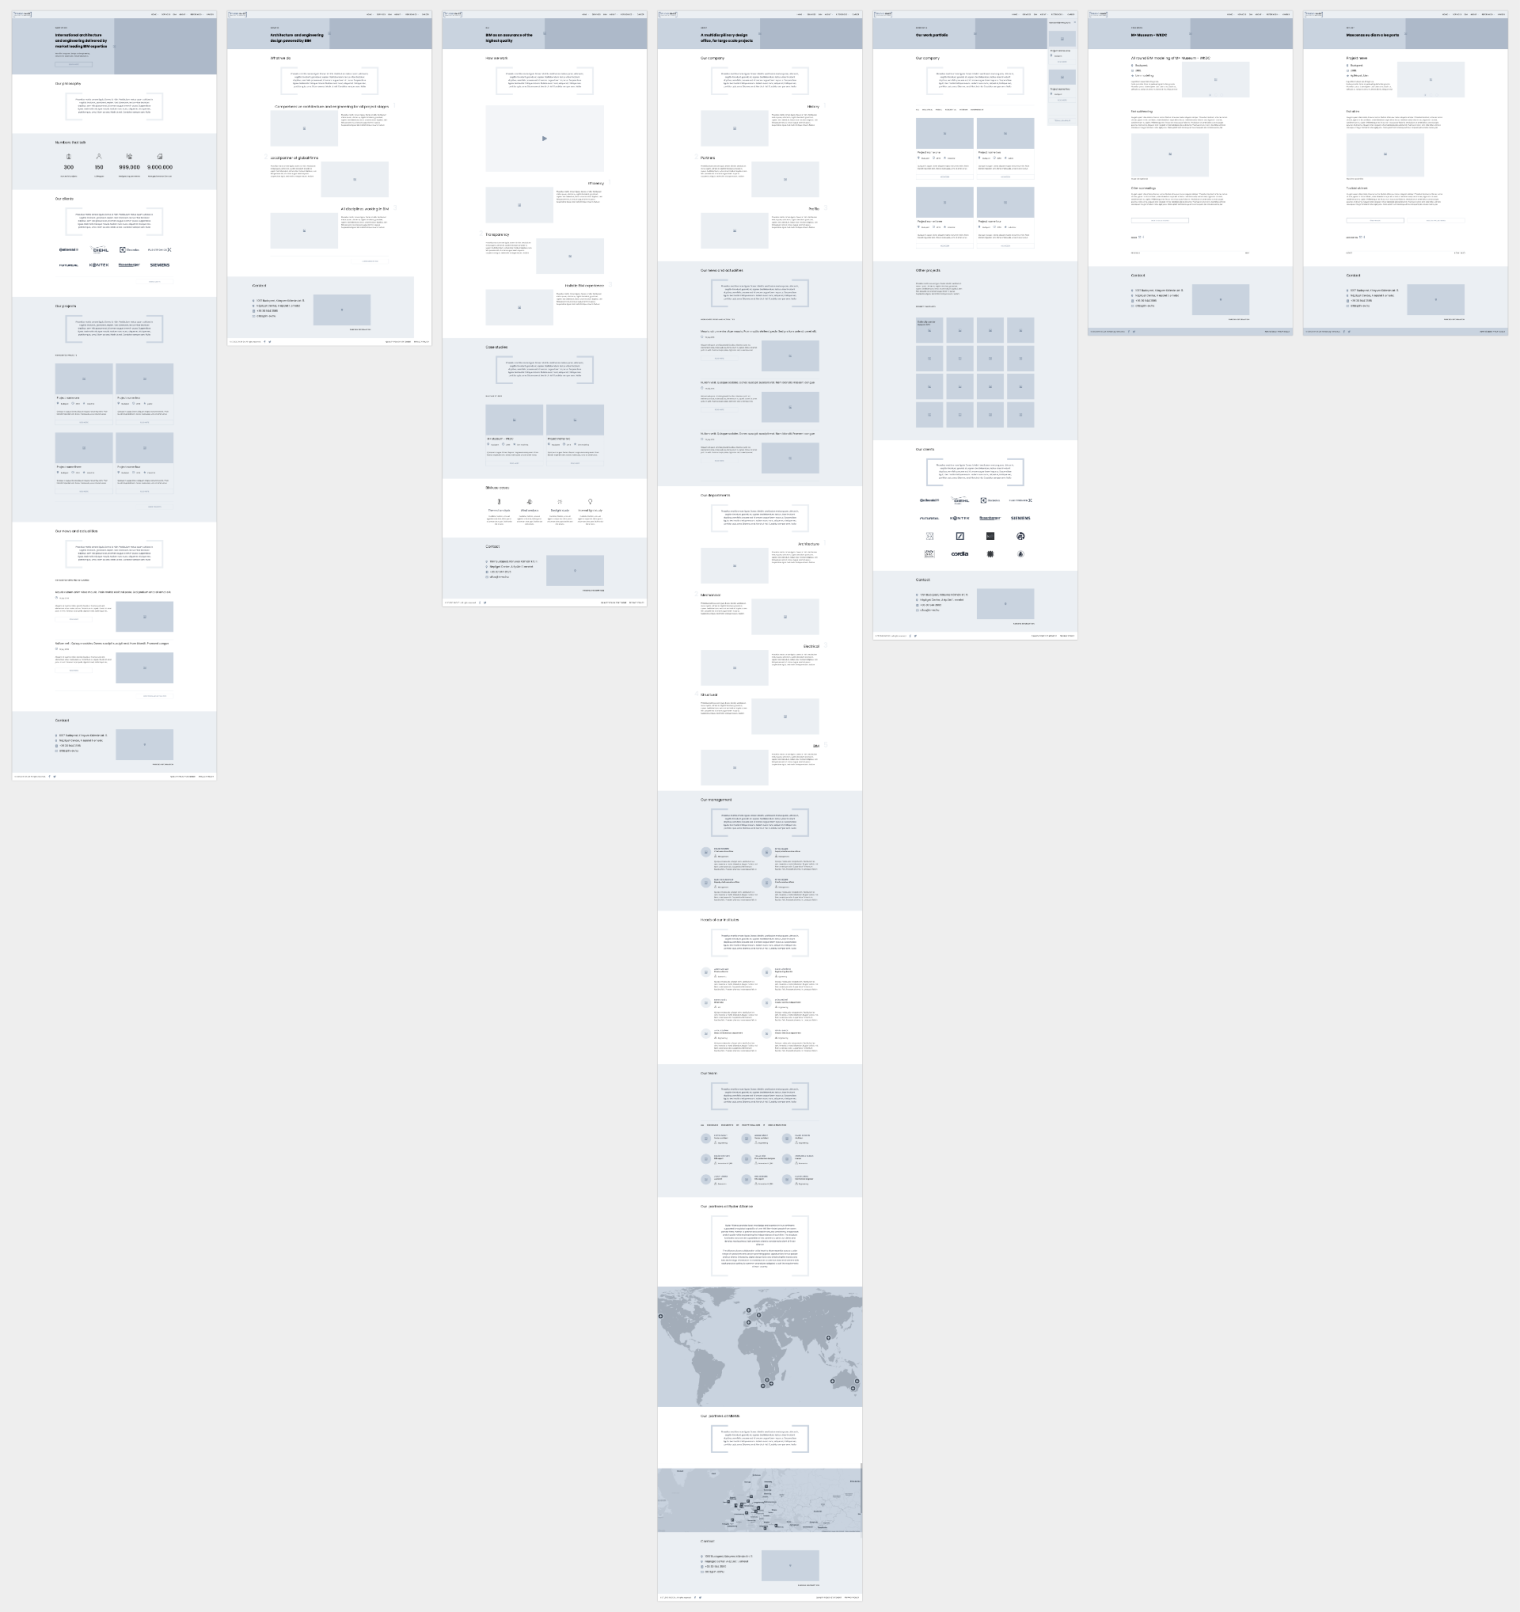 Designing wireframes for business website’s pages